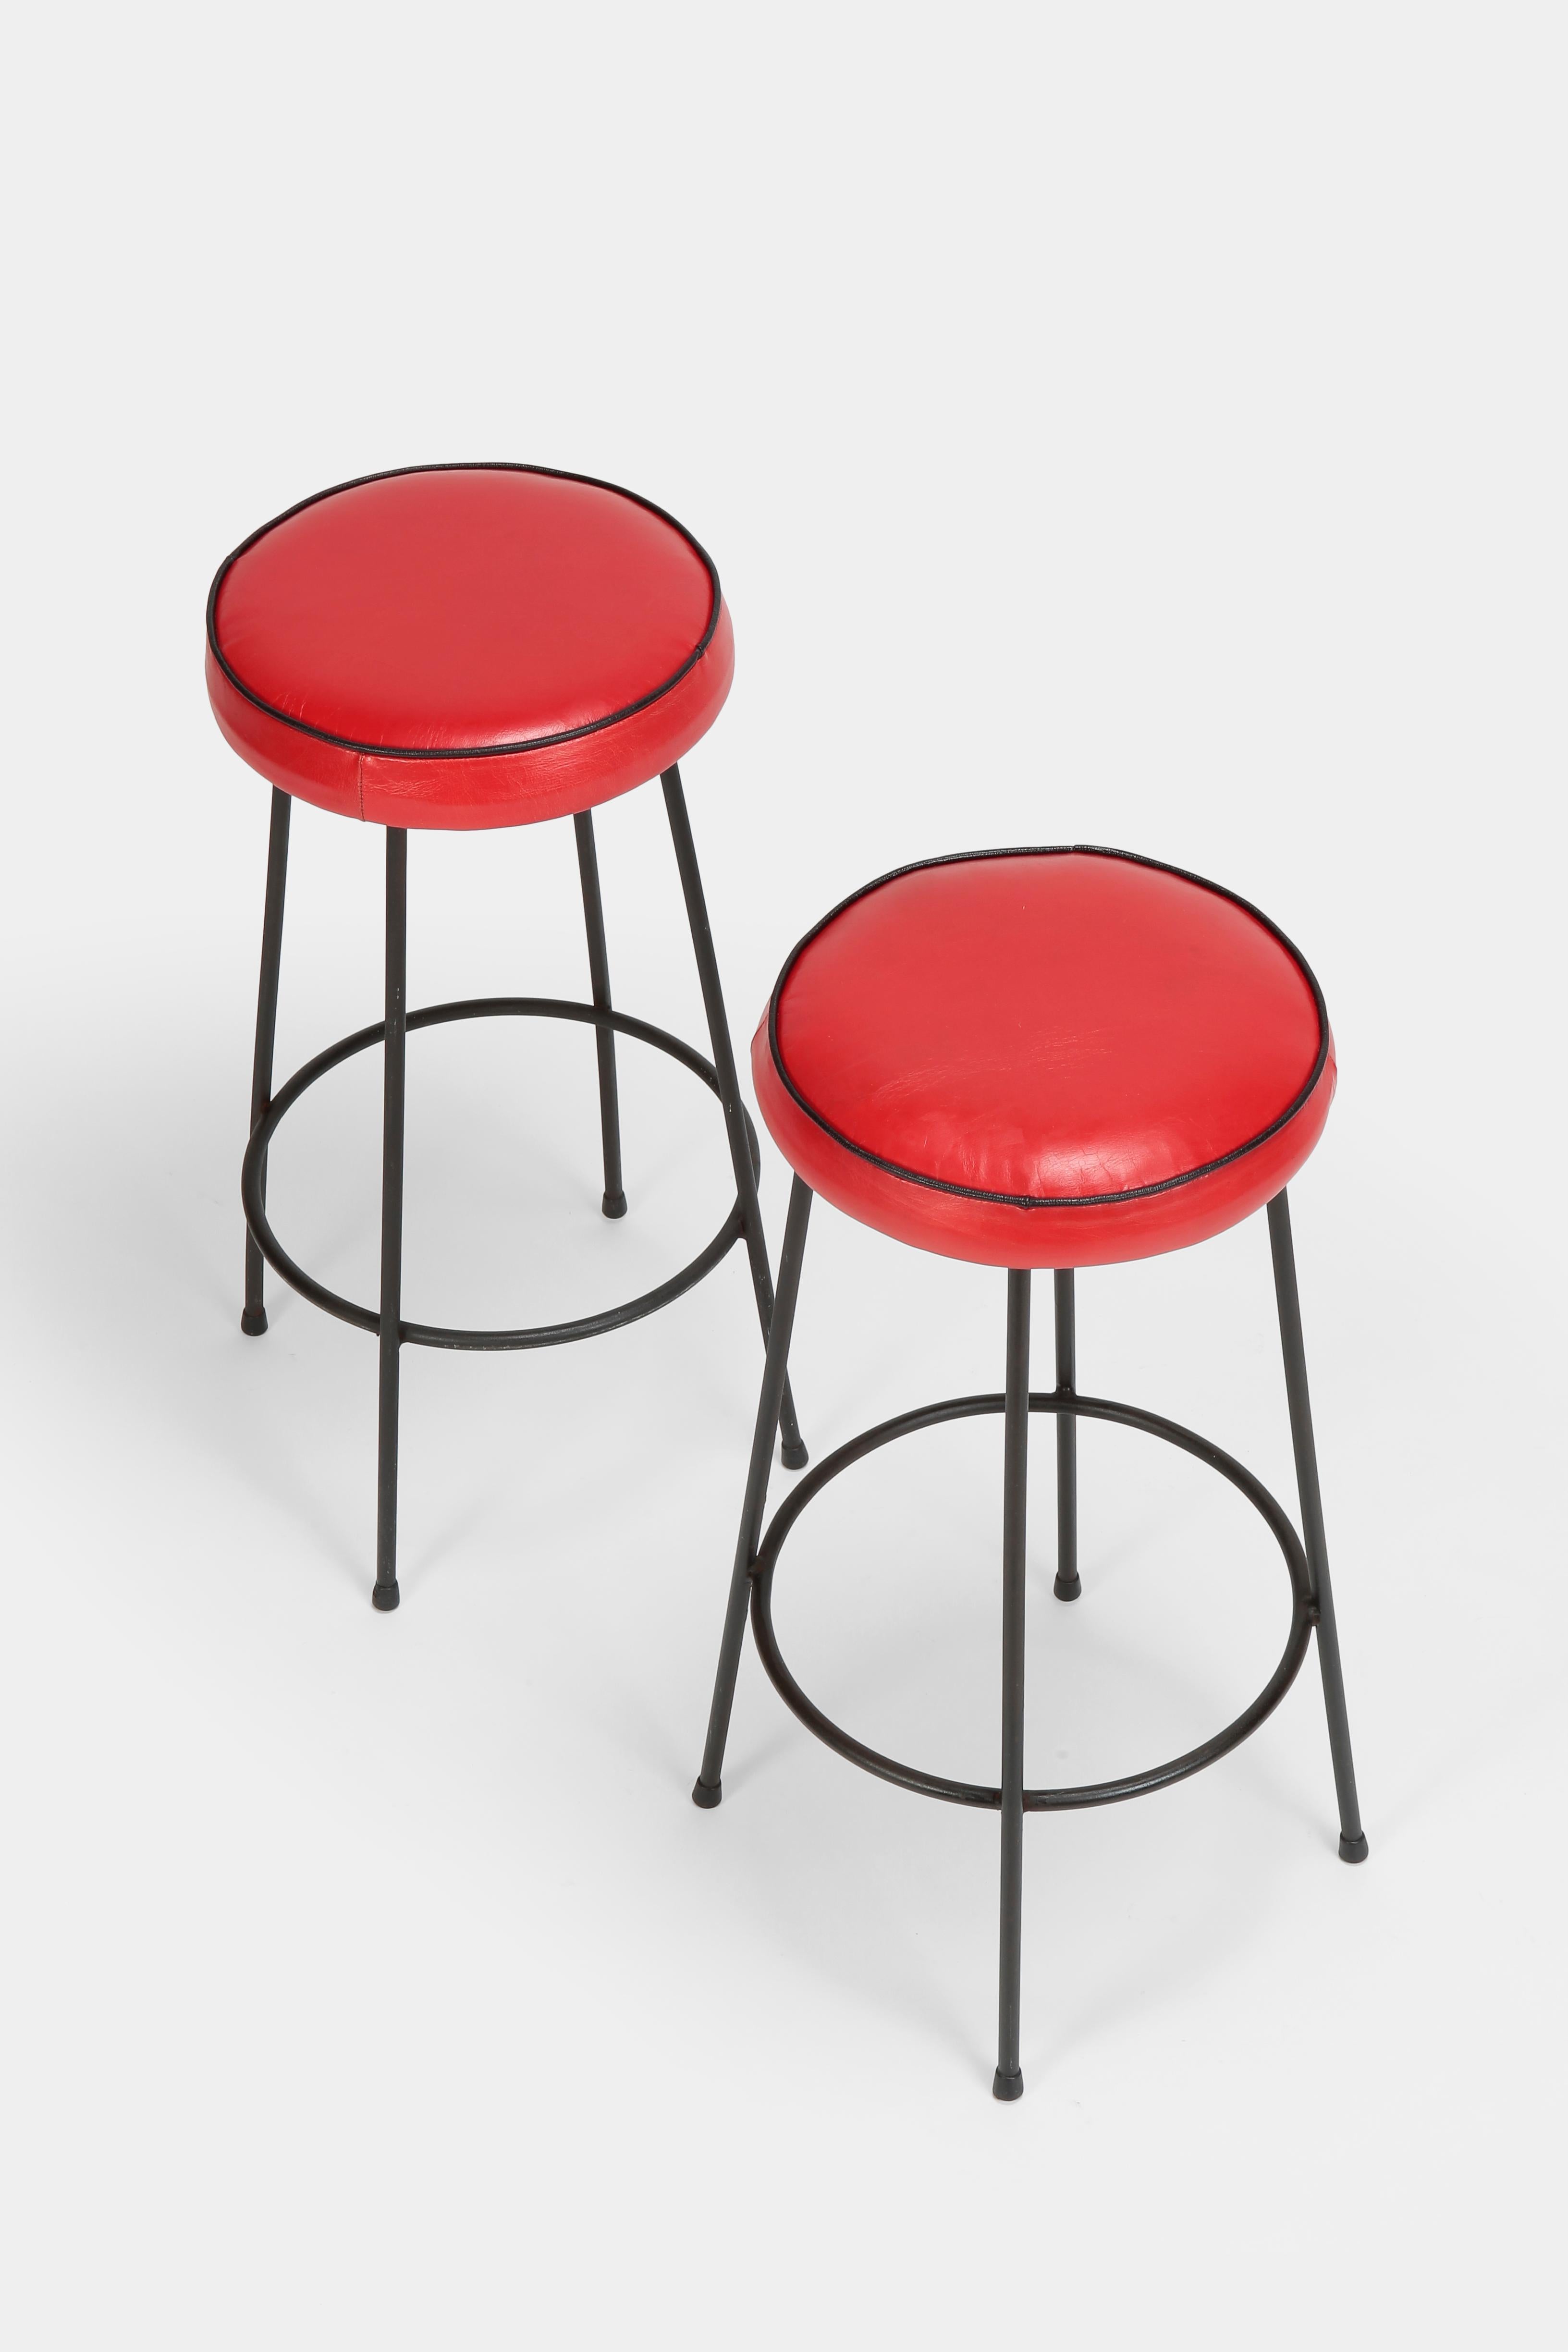 Pair of “Rockabilly” bar stools made in Italy in the fifties. Very nice hand sewn goatskin seats, solid steel tubular frame, newly upholstered. Sturdy and a lot of fun.